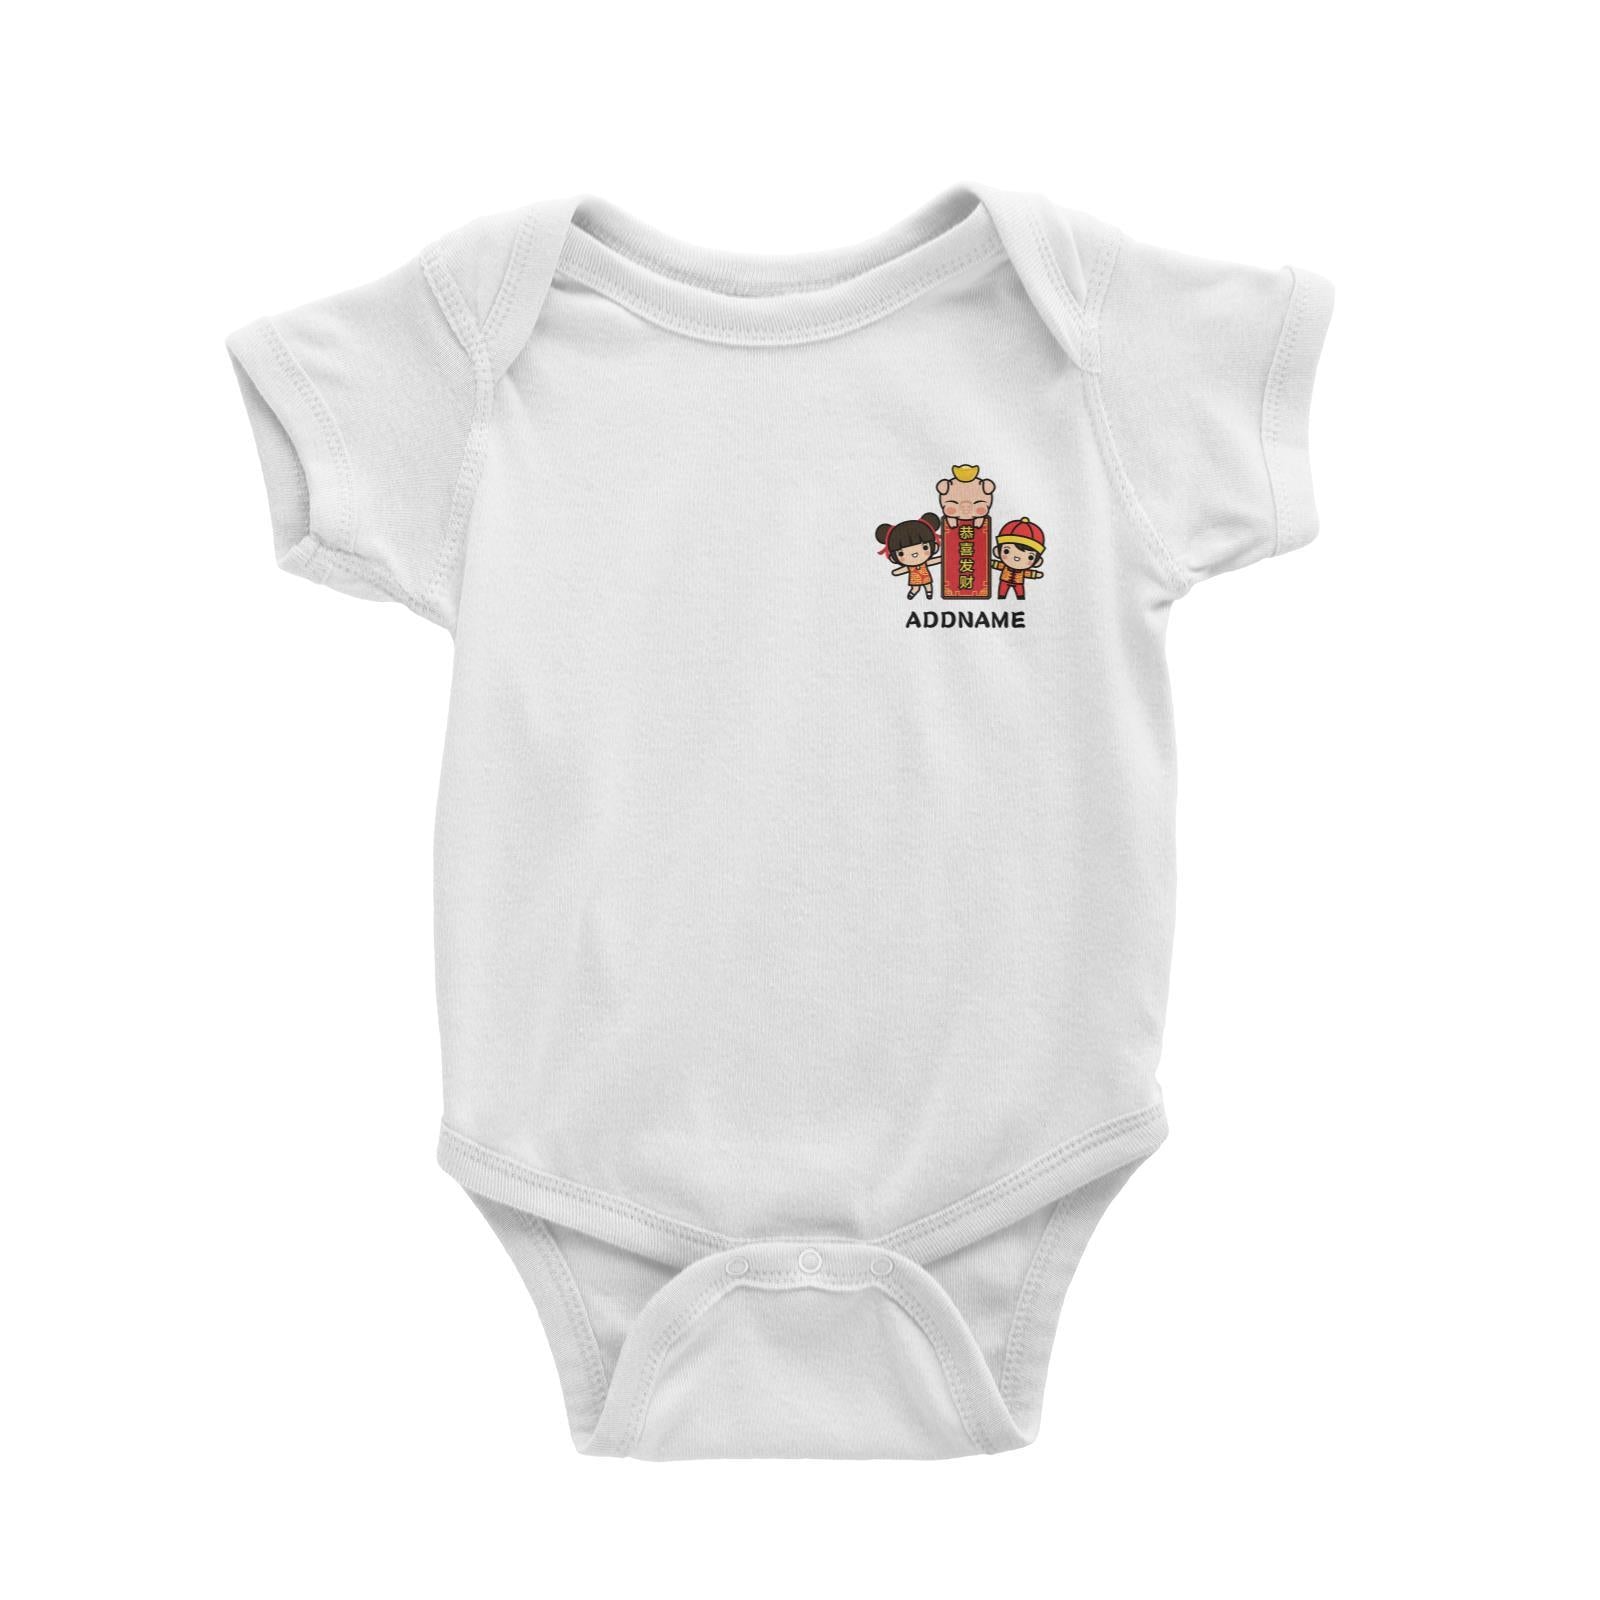 Prosperity Pig Boy, Girl and Baby Pig with Gold and Signage Pocket Design Baby Romper